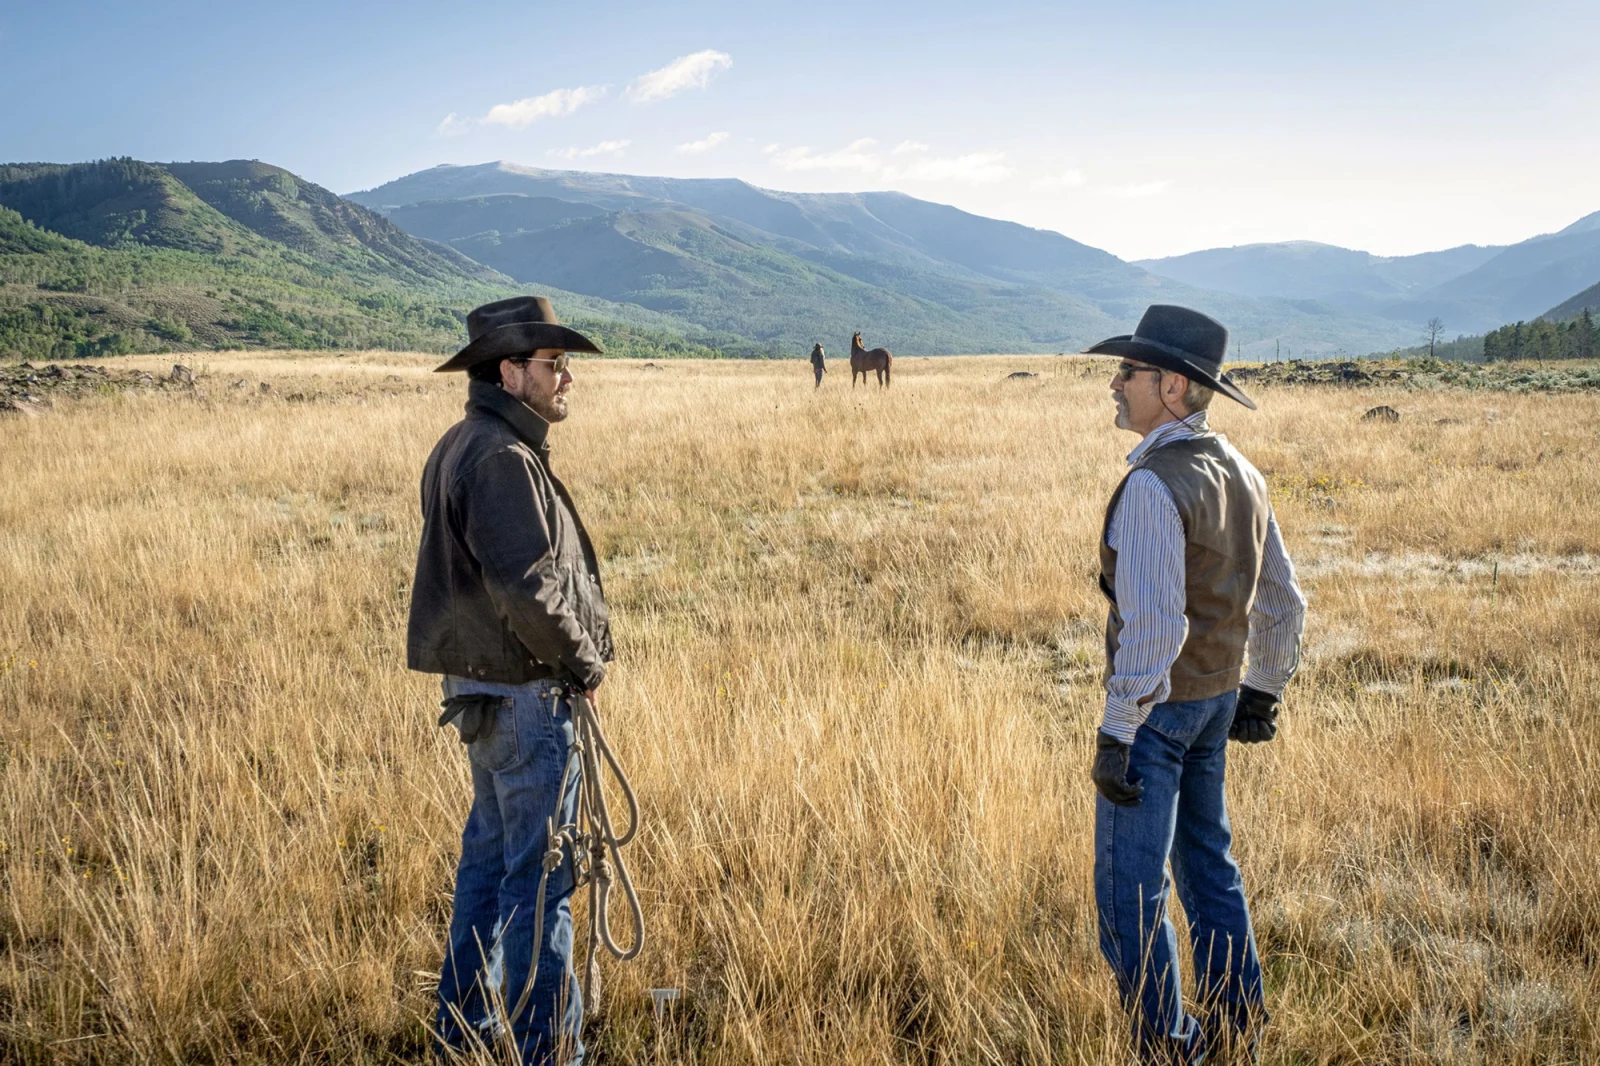 A review of Yellowstone Episodes 1 and 2 of Season 5